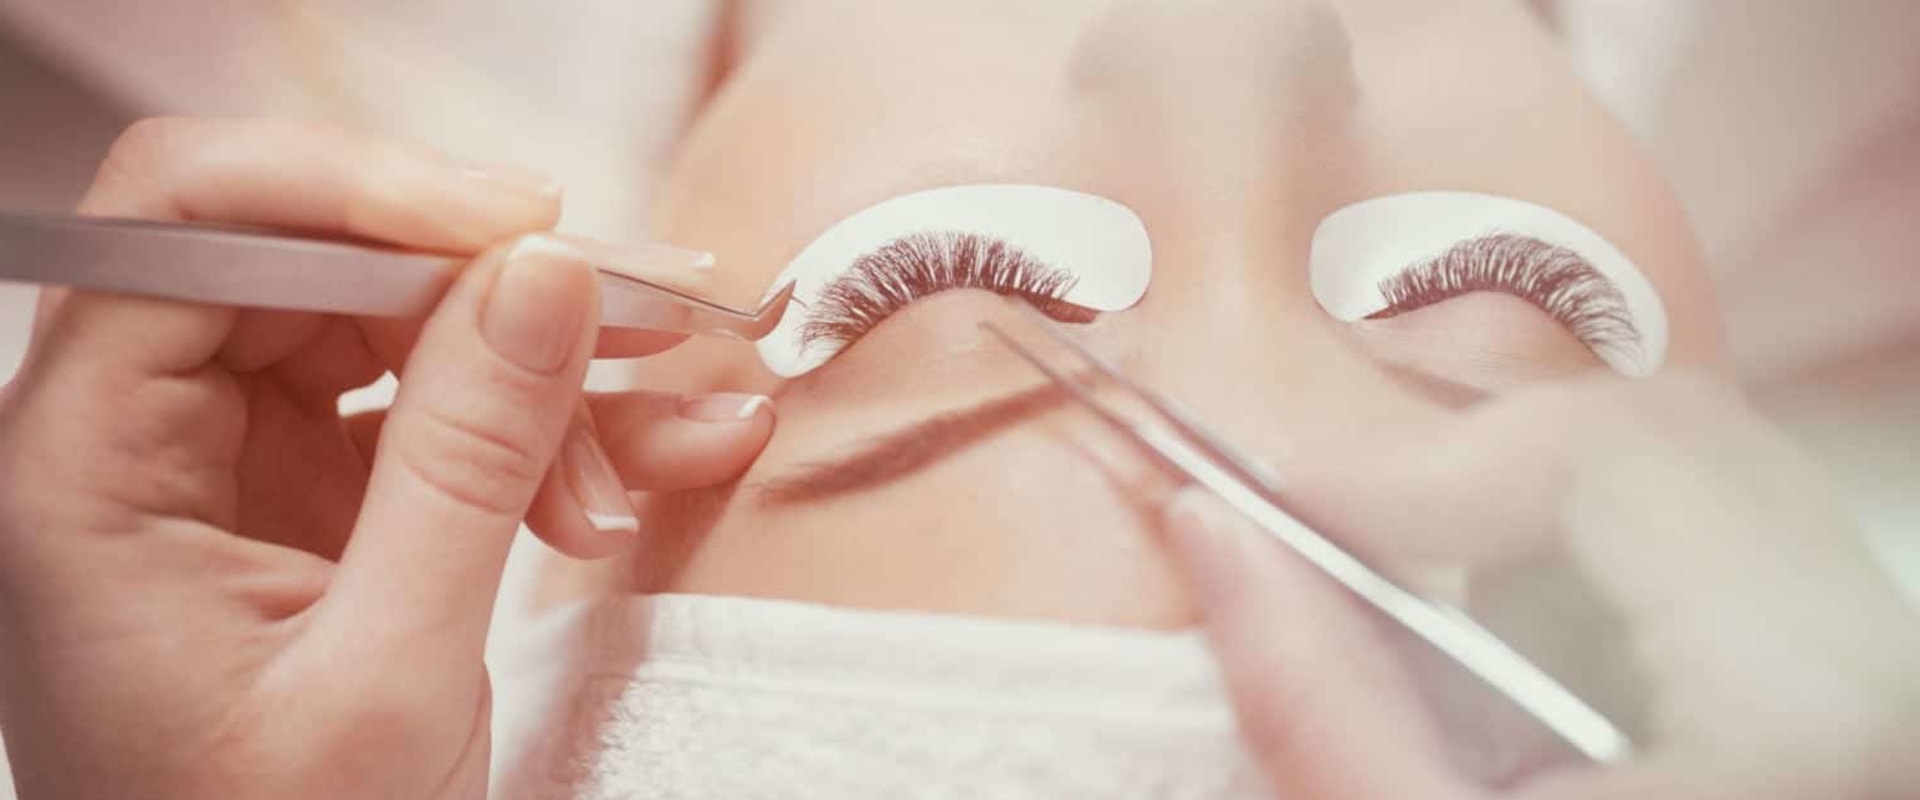 How long should you wait between lash appointments?